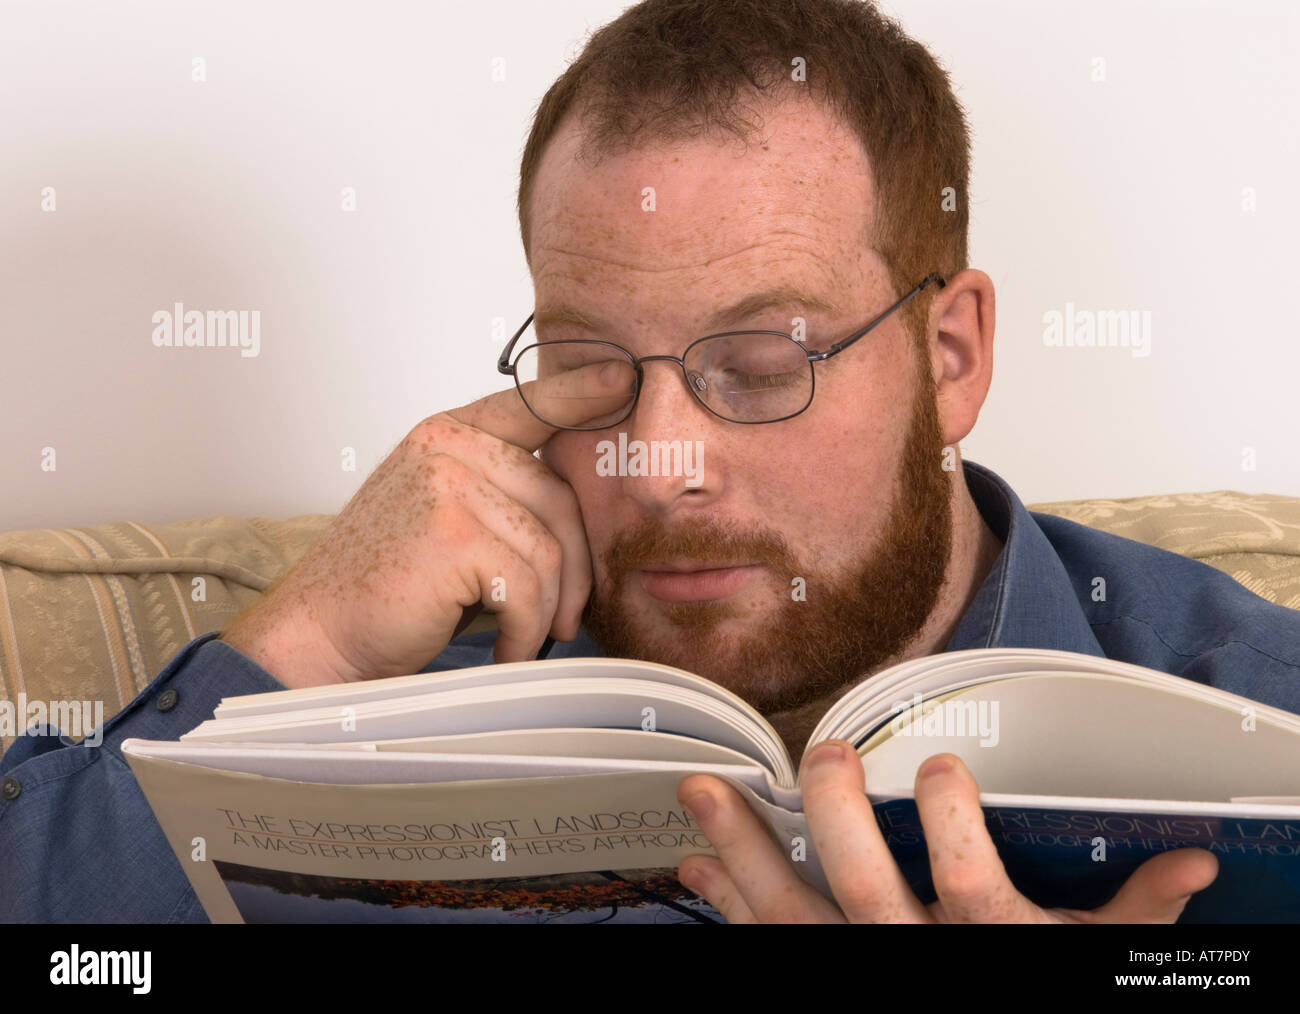 young man with poor eyesight wearing glasses rubbing his strained eye with finger trying to read book, incorrect spectacles Stock Photo